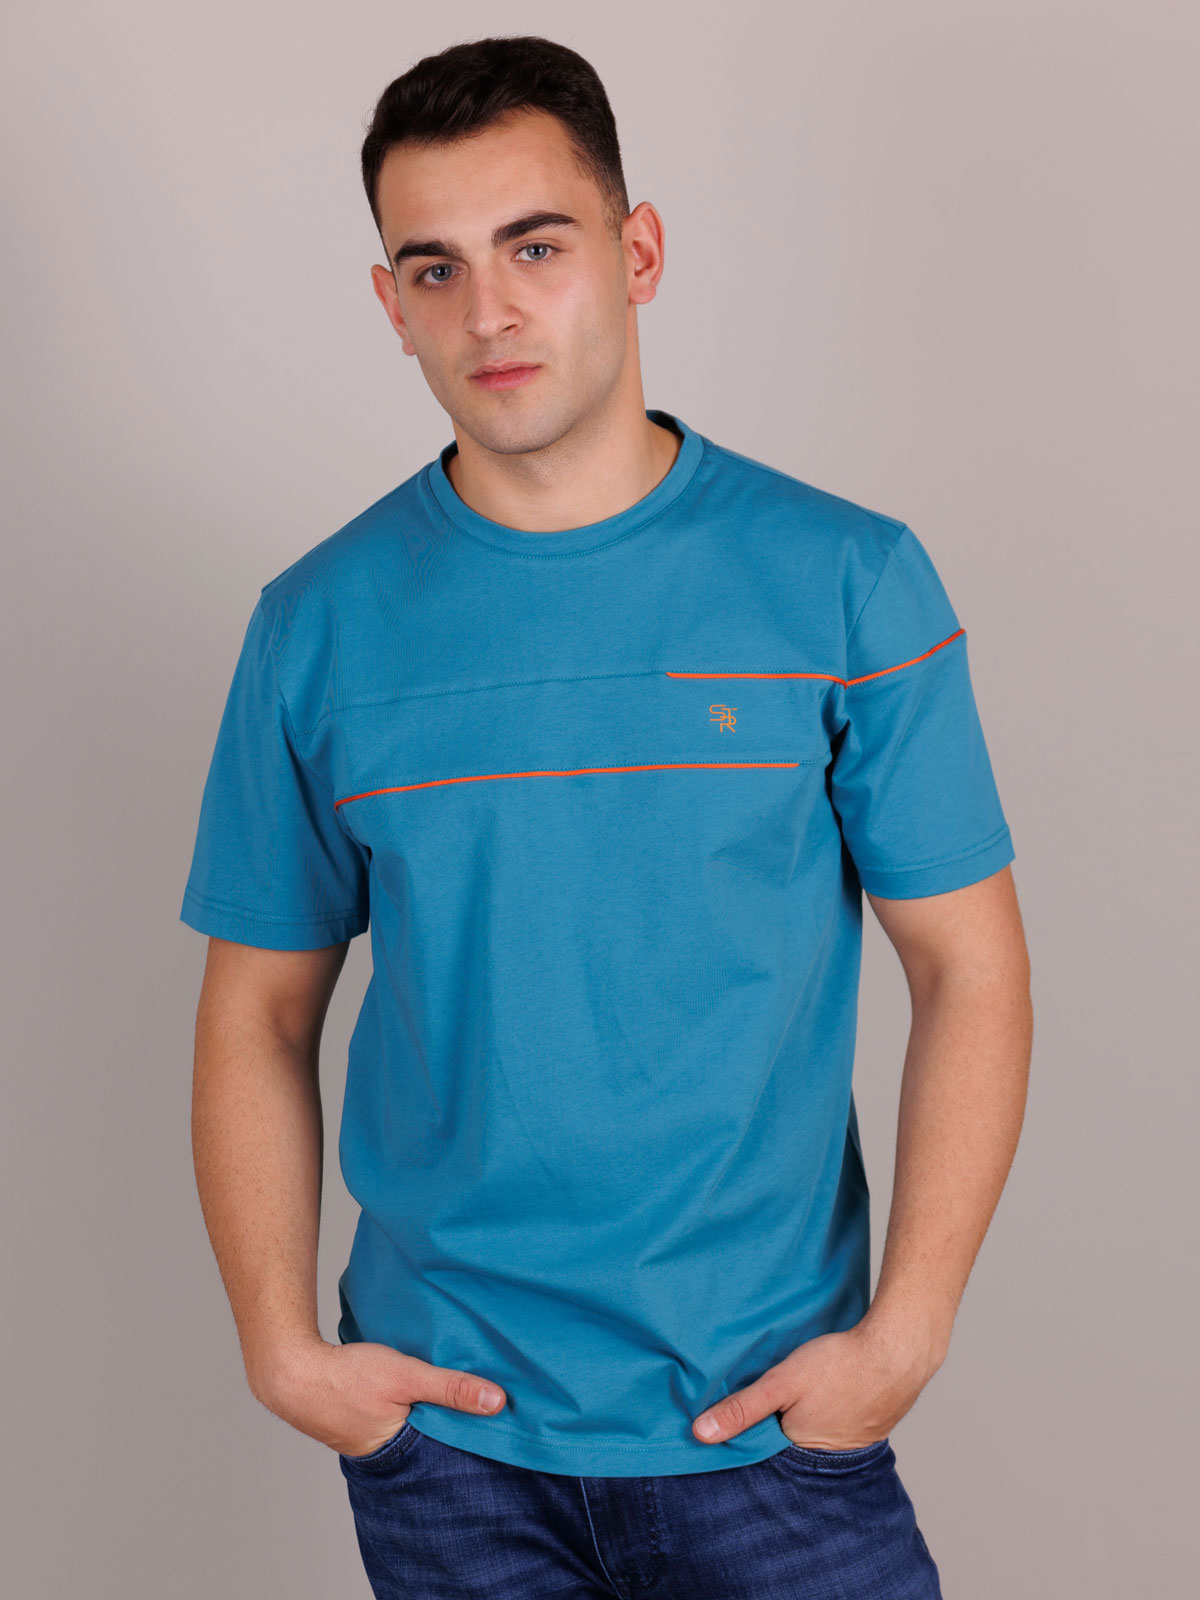 Short sleeve blouse in turquoise - 96455 € 27.00 img4